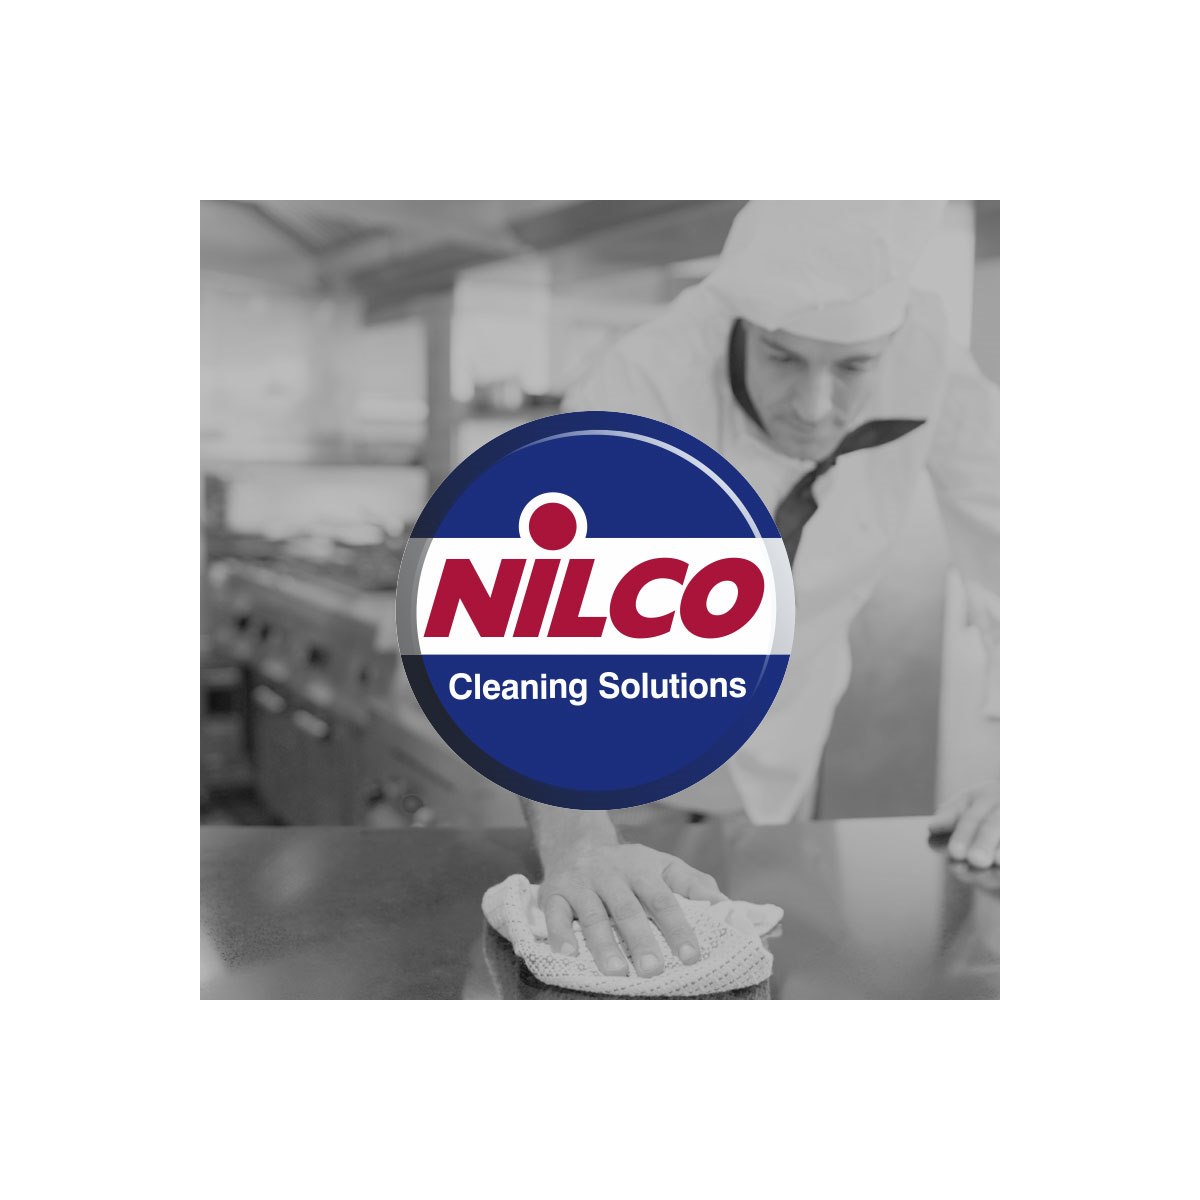 Nilco Products